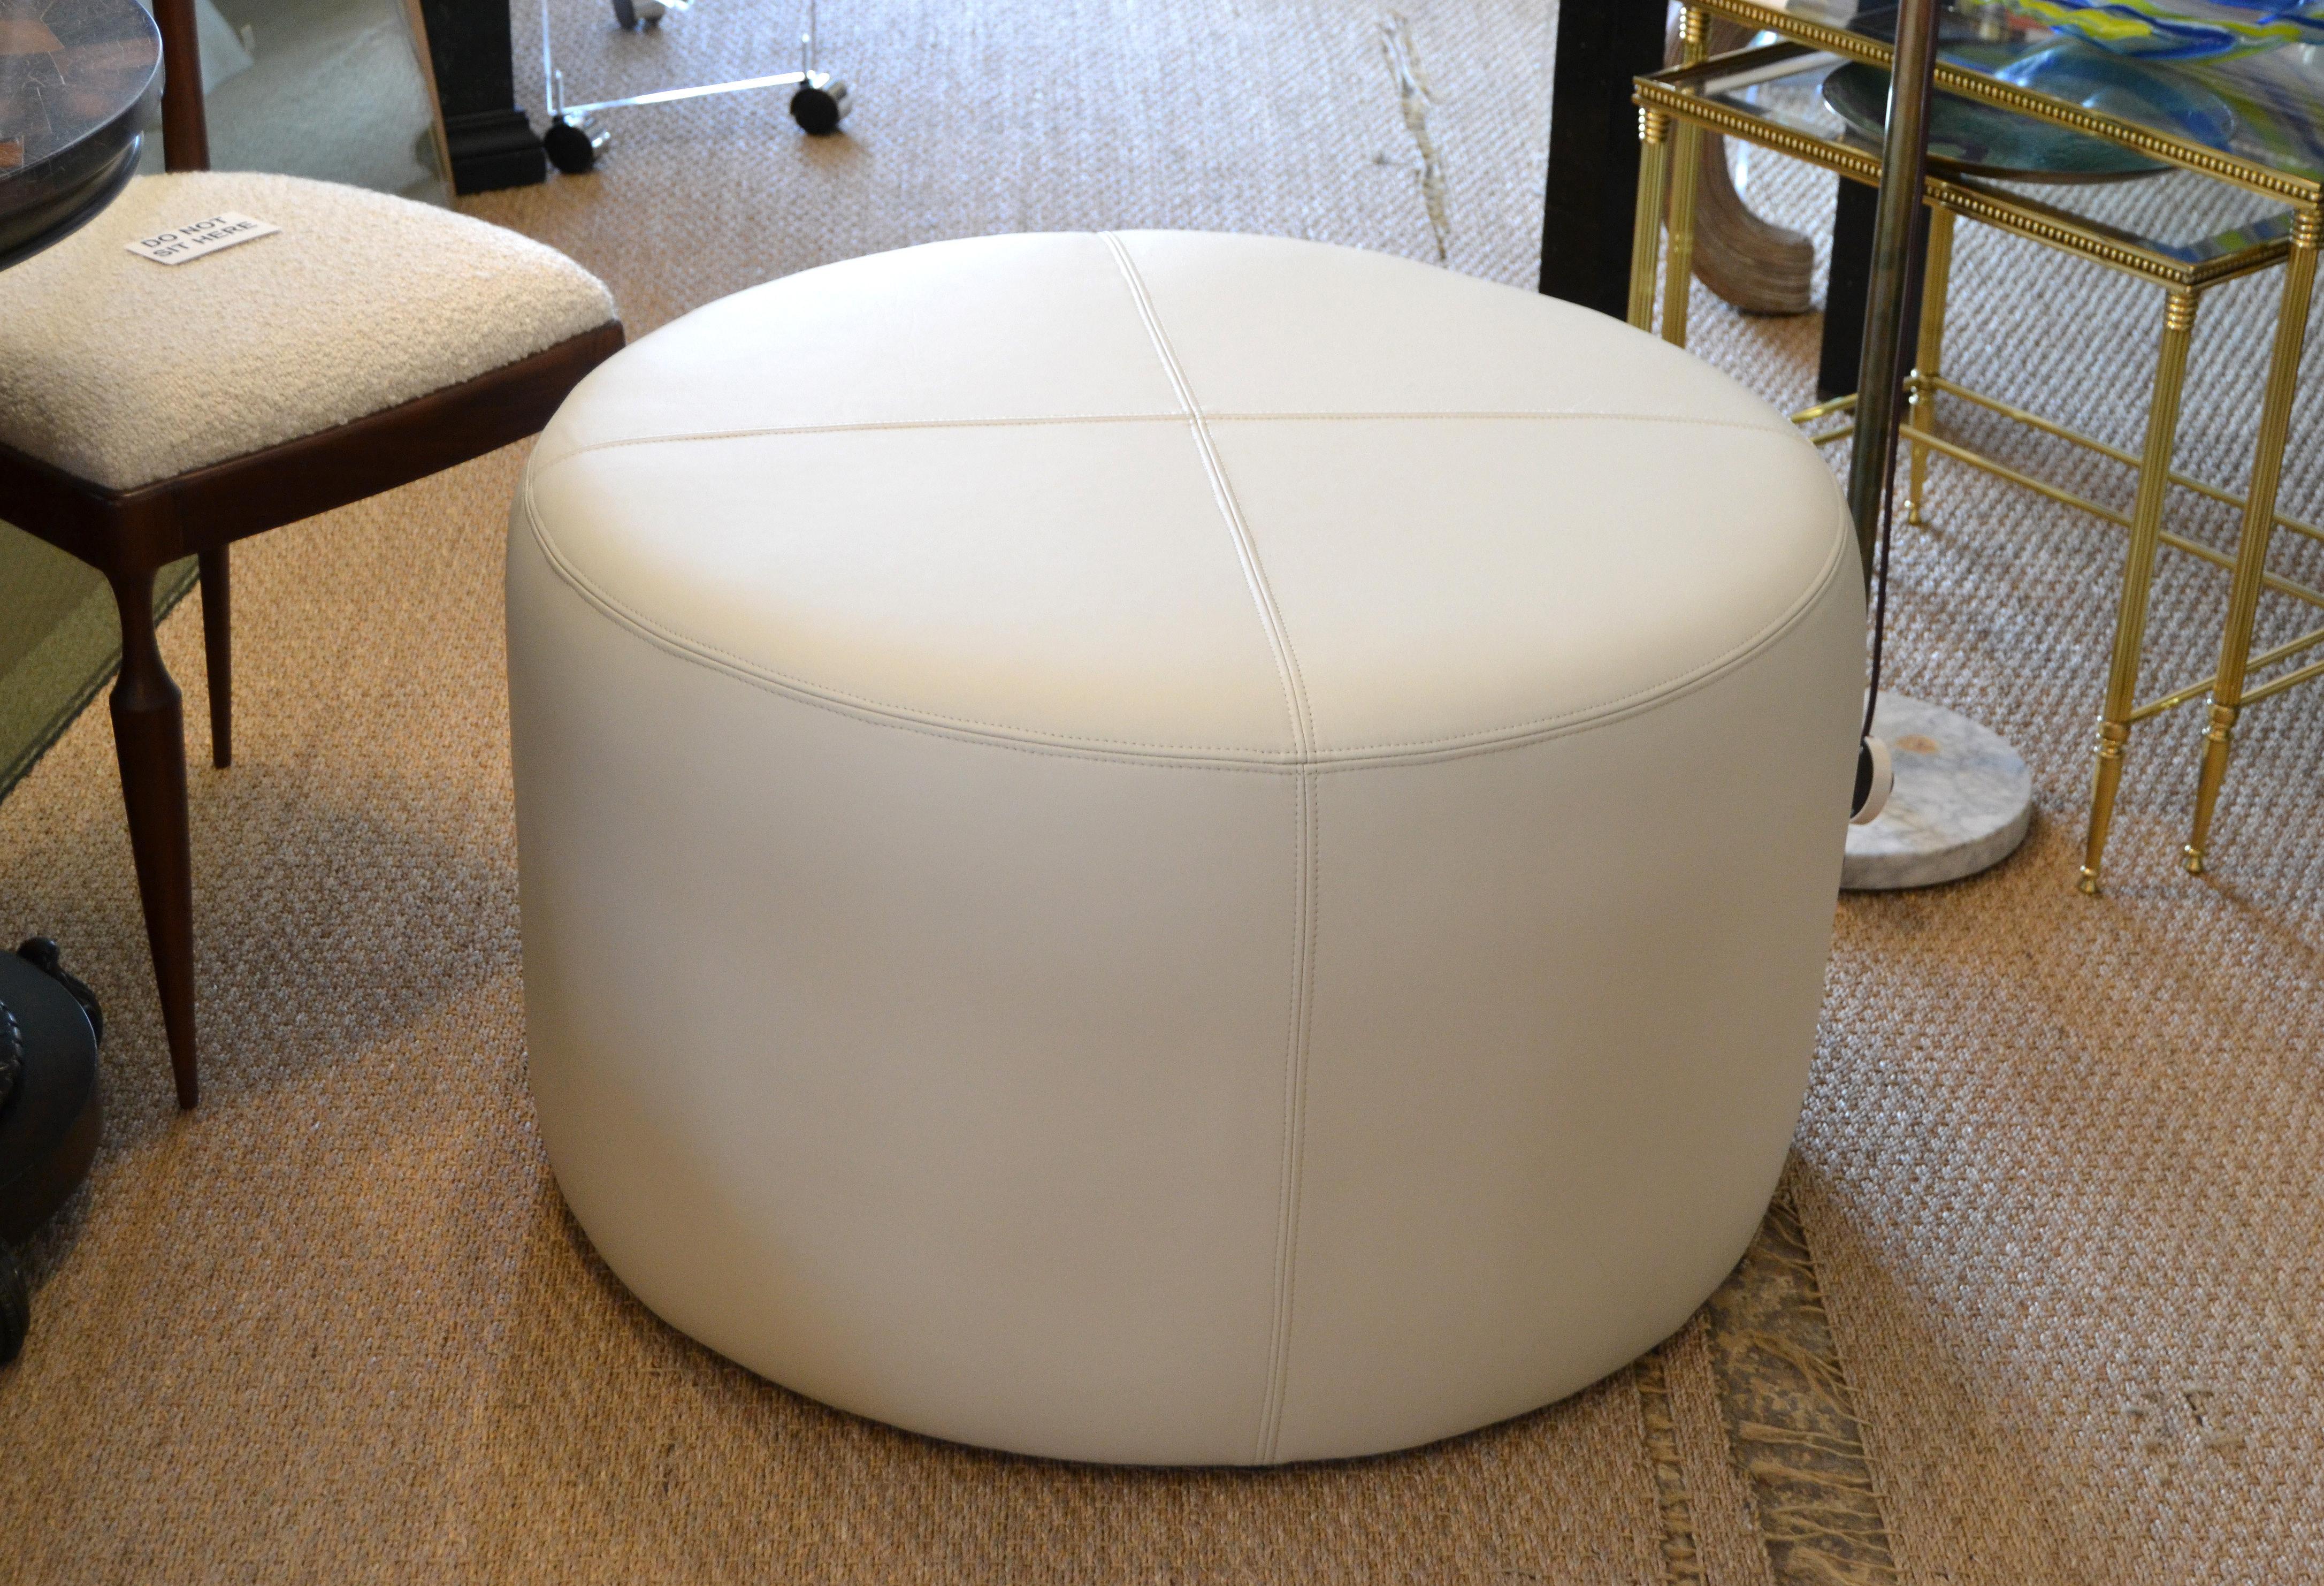 Ottoman in luxurious beige leather. Sown in quarters on the seating surface.
We use only the very best quality leather.
Featuring a beautiful tight grain and a fine hand.
Great addition and perfect color for your high end furnishings.
One is